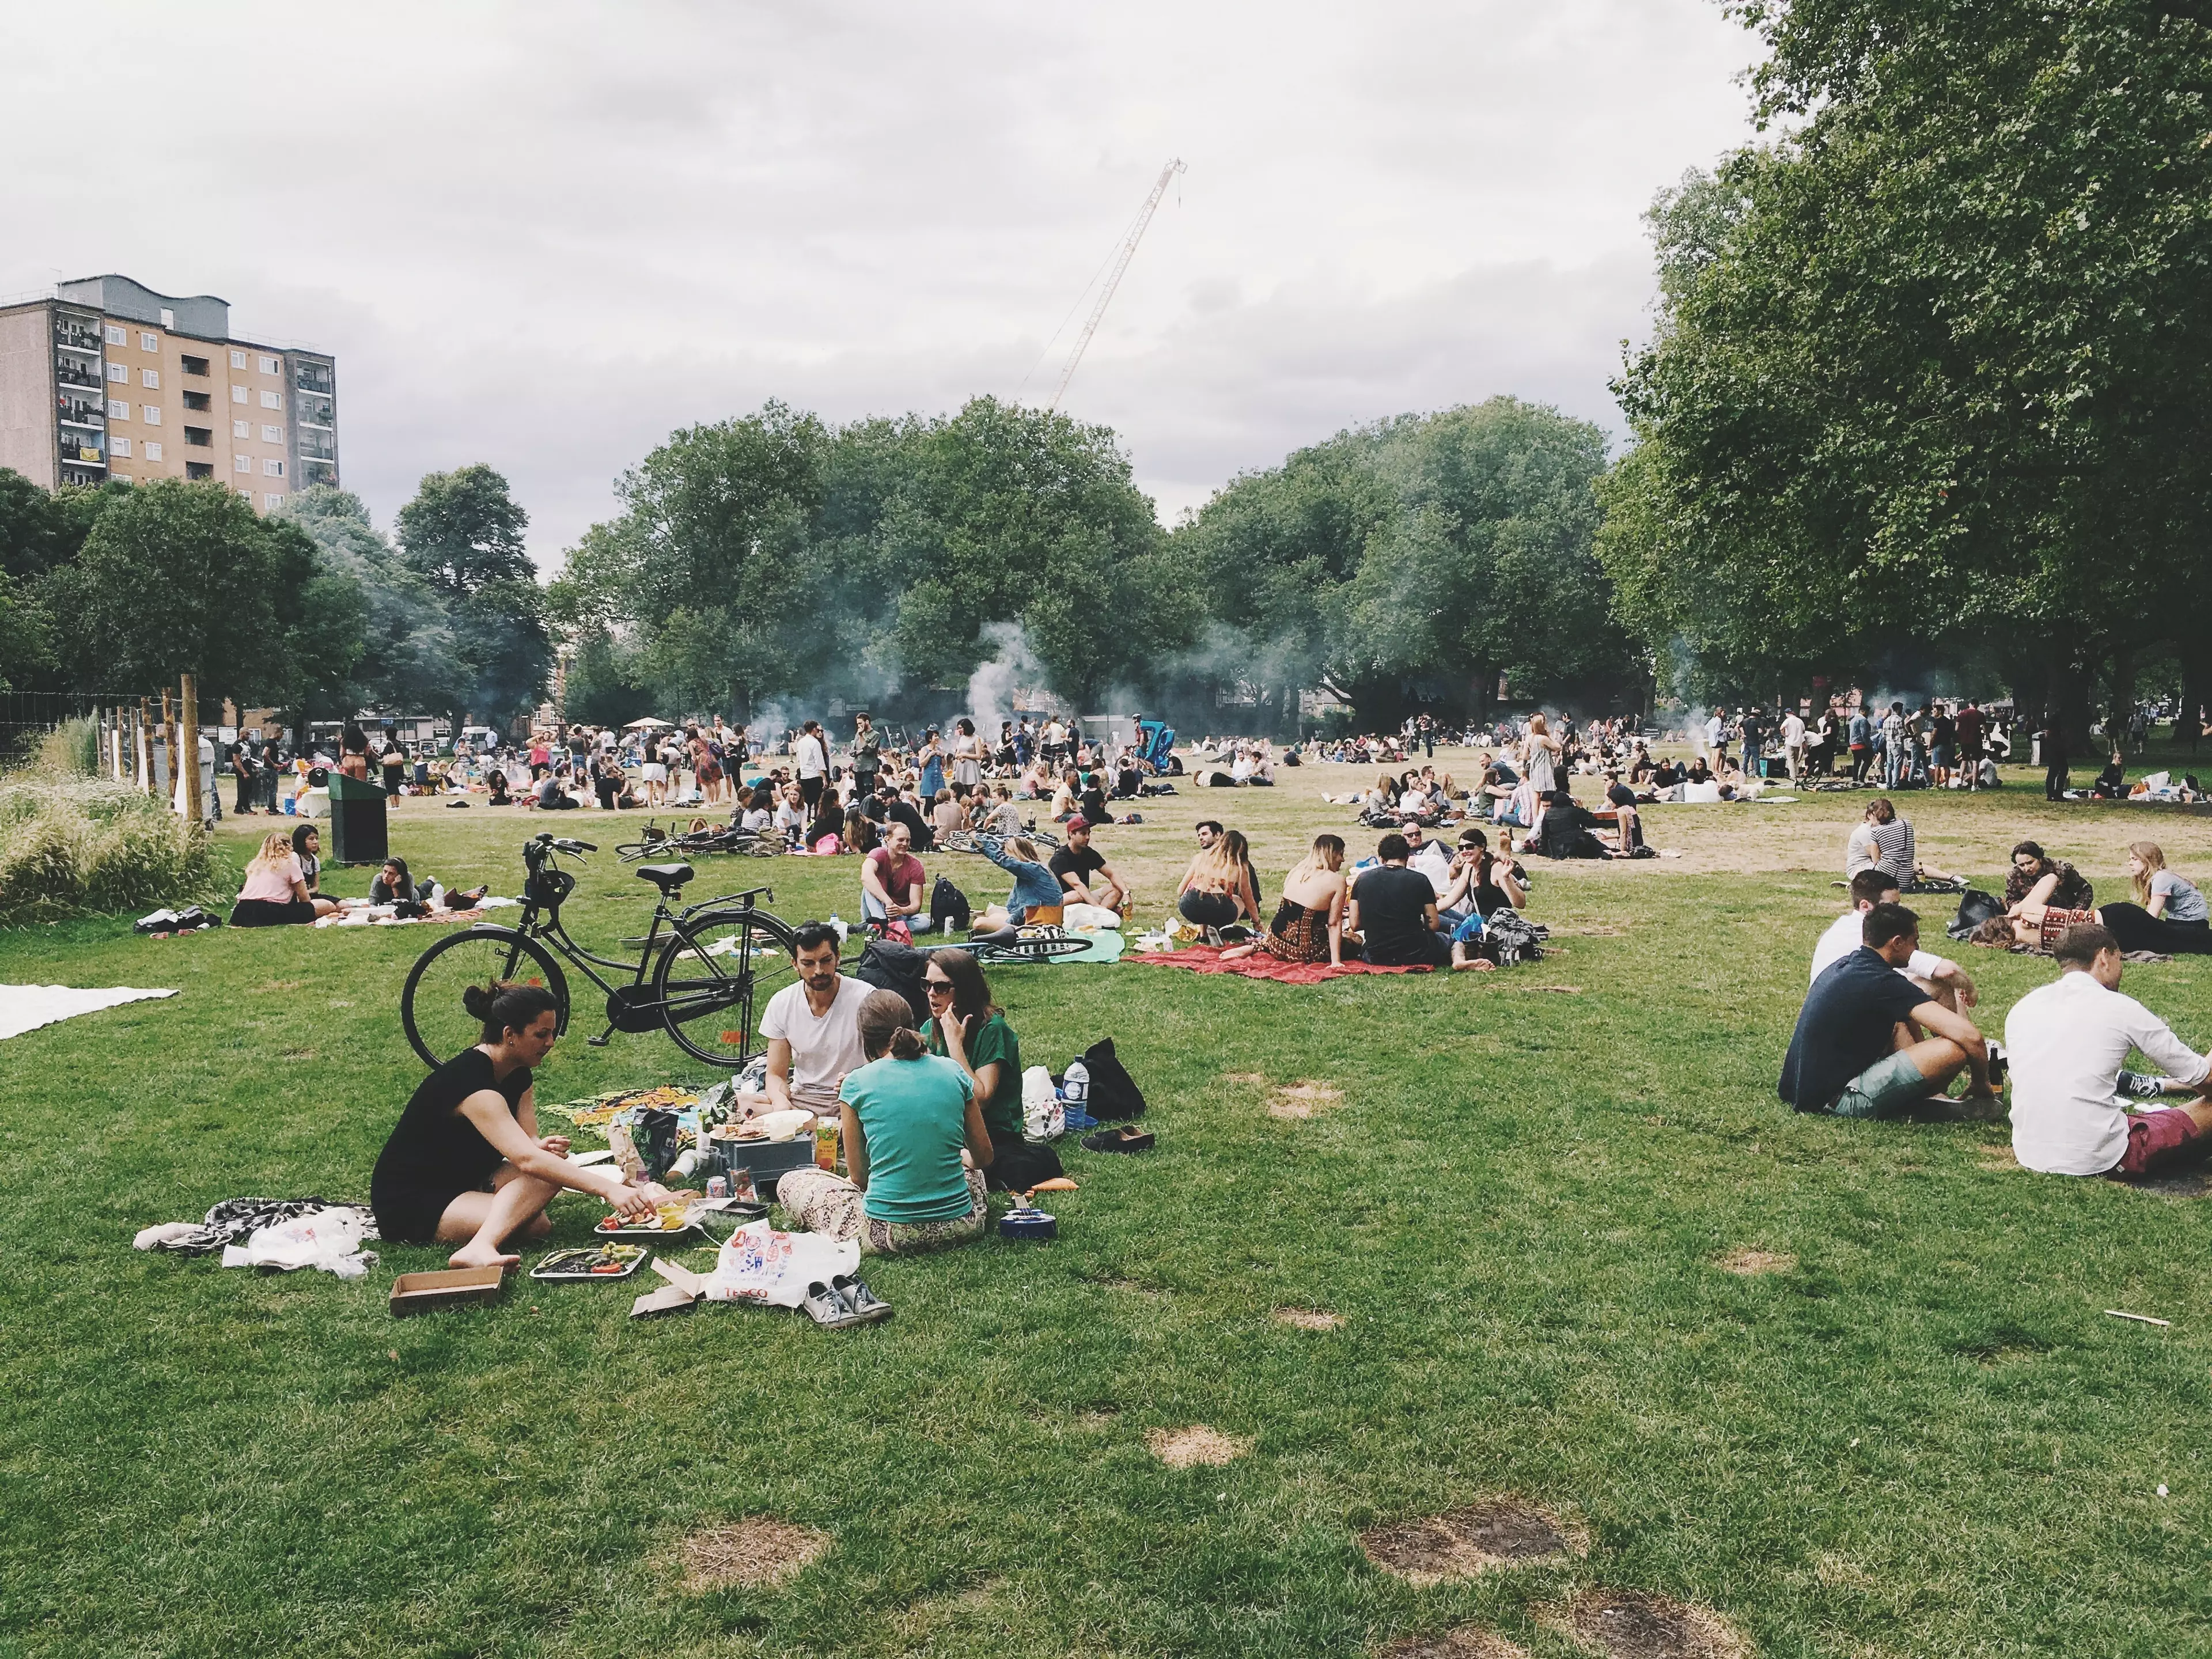 Bank holiday weekend in London (